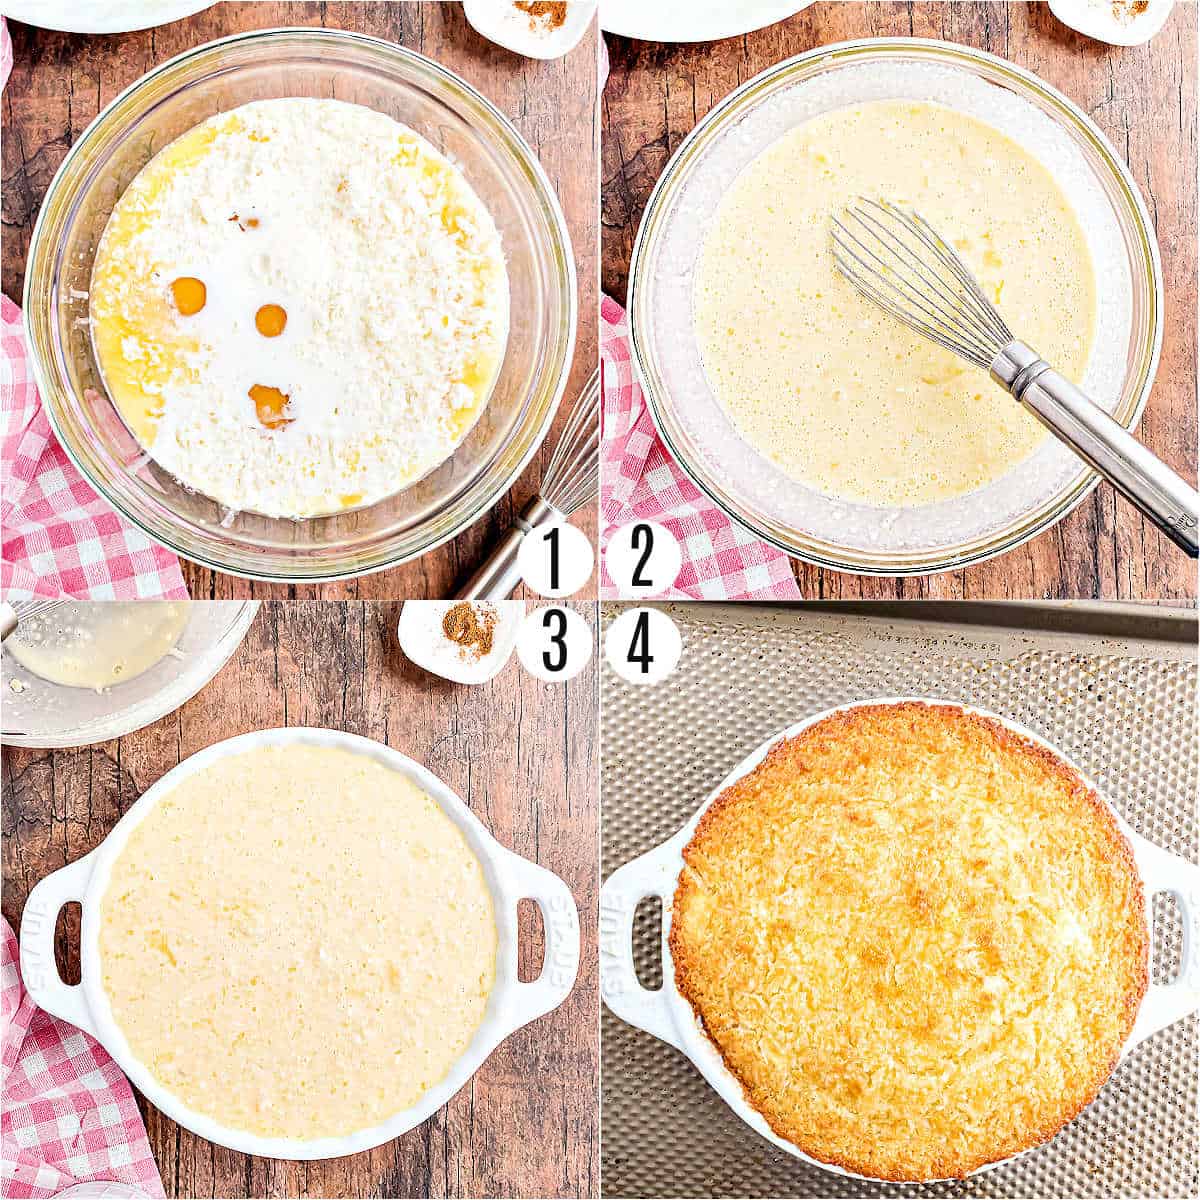 Step by step photos showing how to make coconut pie.